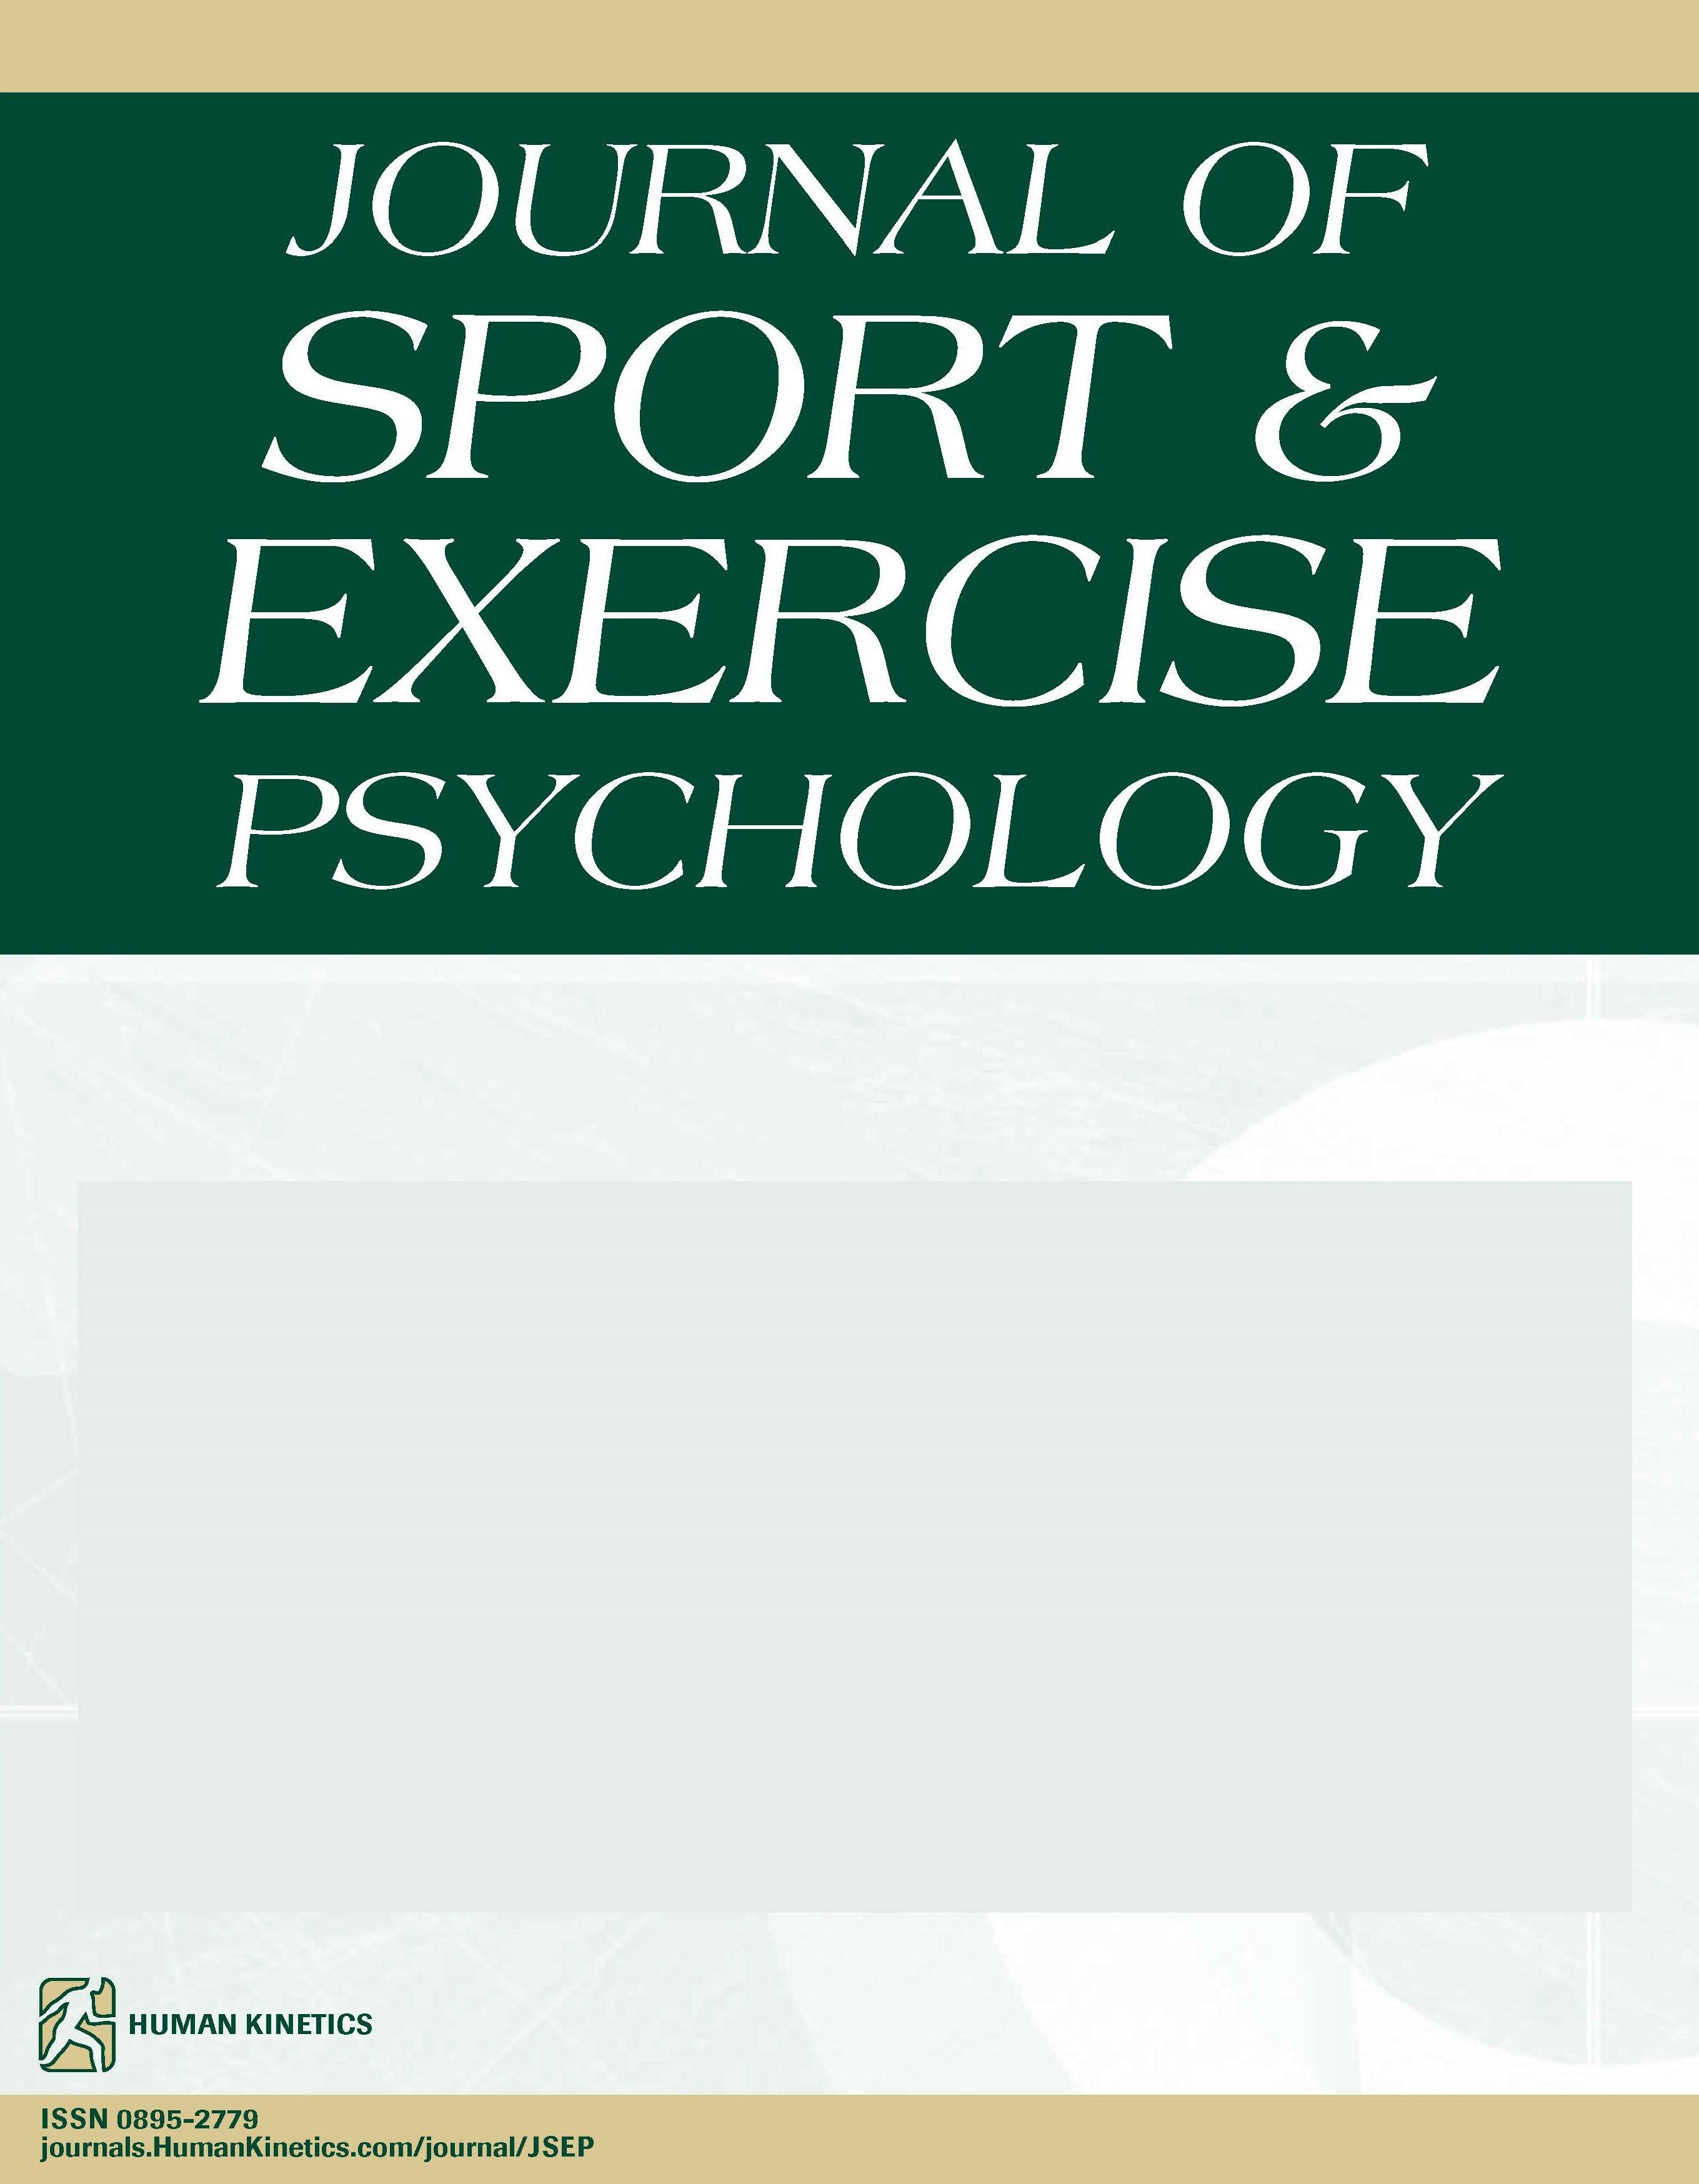 The Provision and Experience of Variety in Physical Activity Settings: A Systematic Review of Quantitative and Qualitative Studies